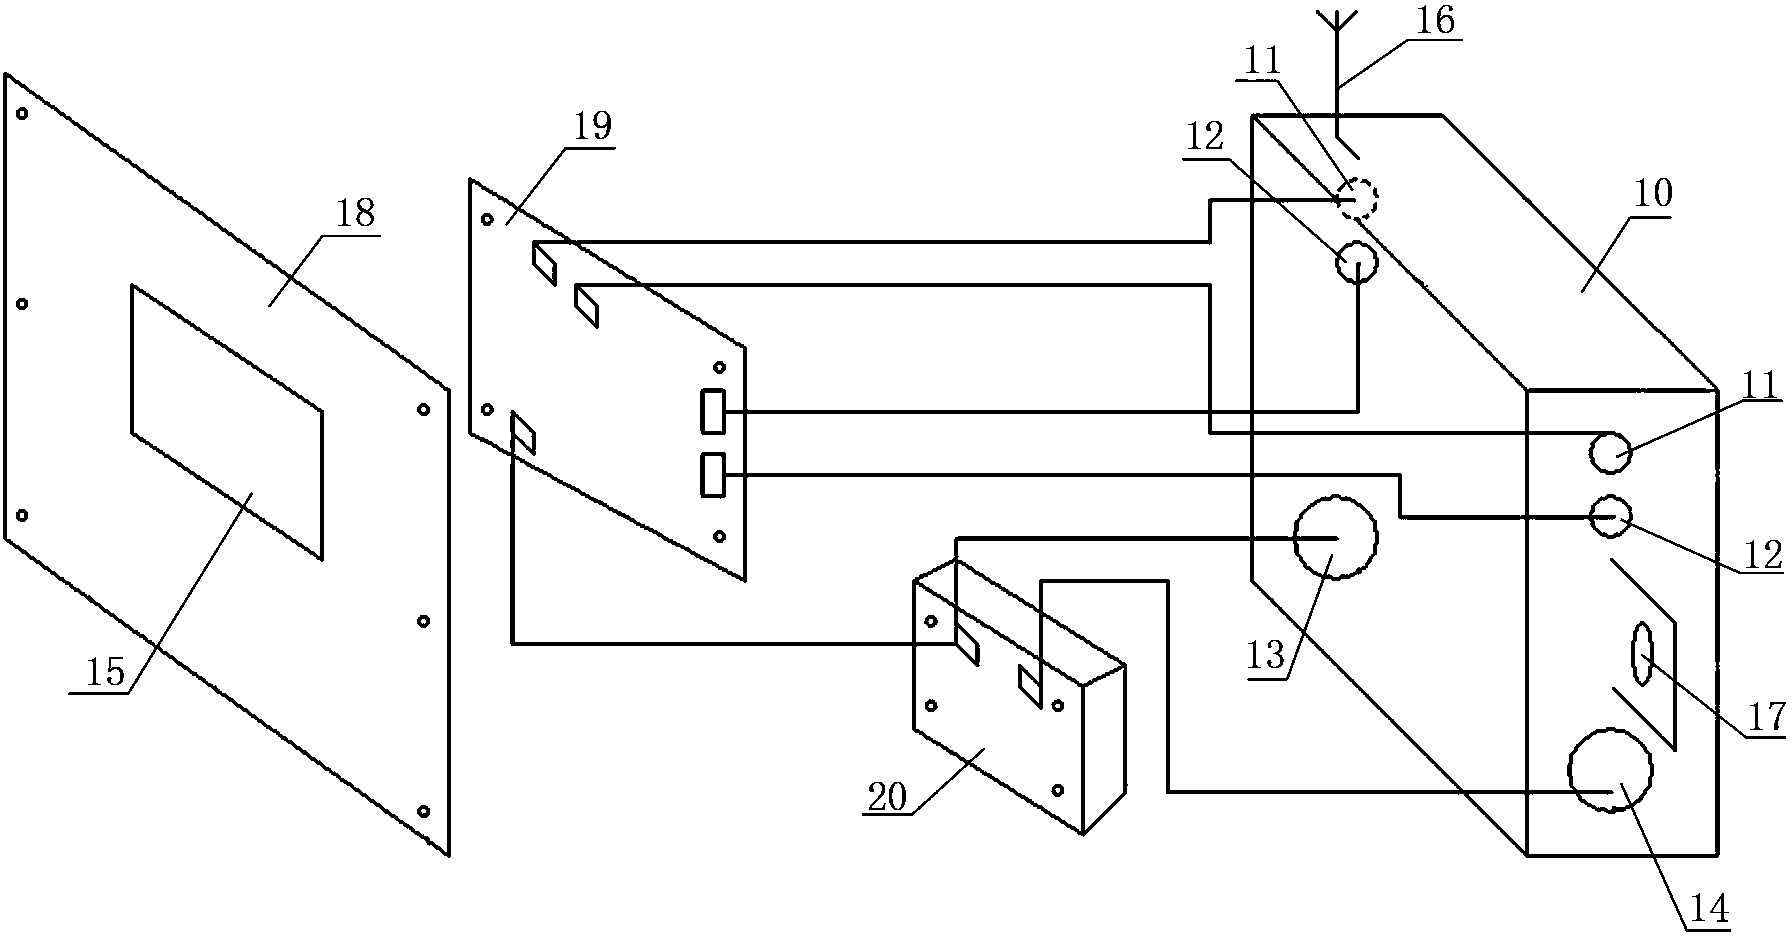 Self-adaptive segmented power supply system and method for one-way track of coal mine tunnel